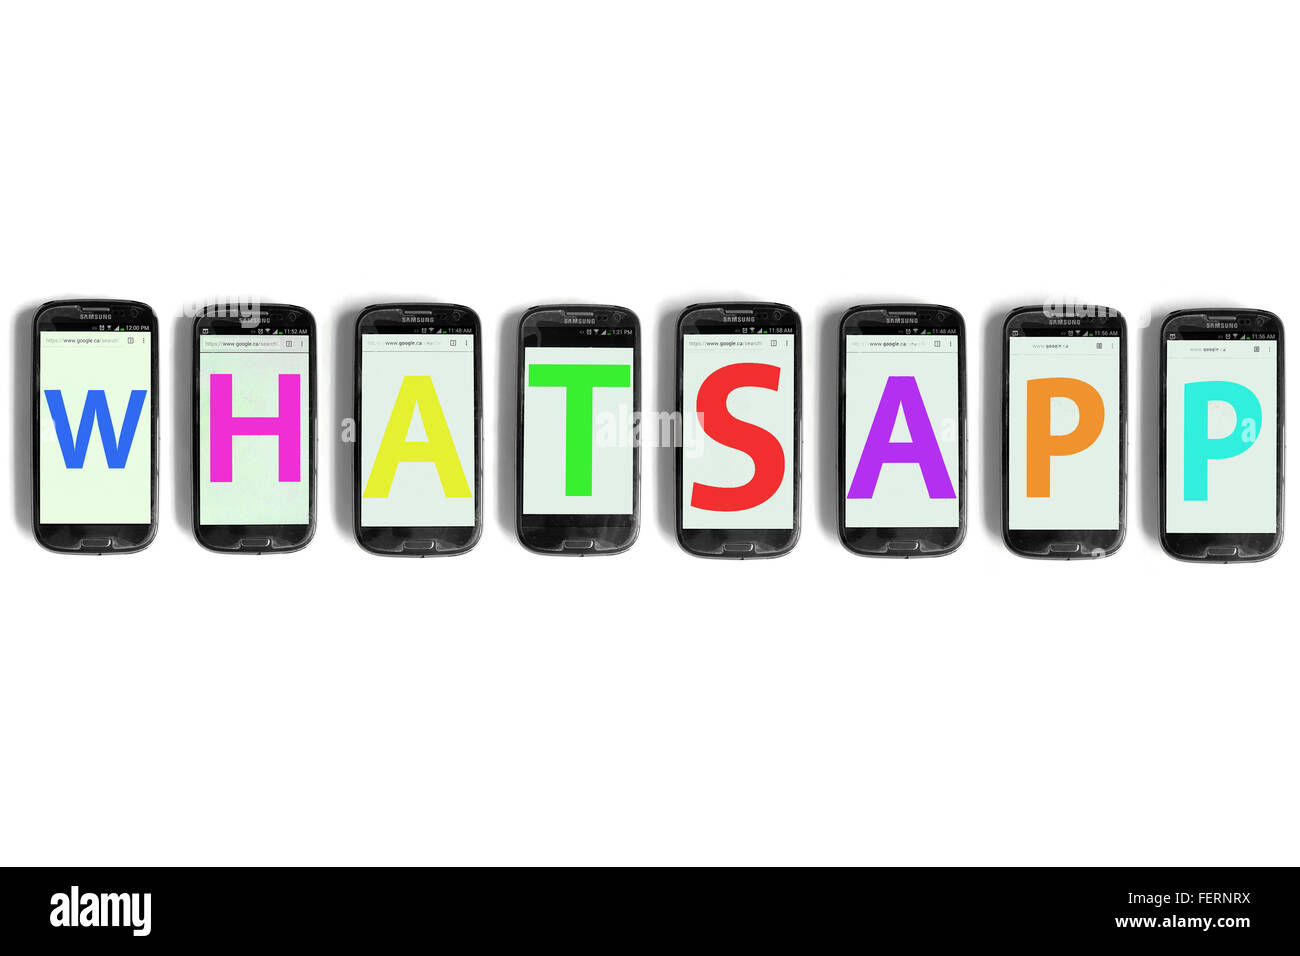 Whatsapp on the screens of smartphones photographed against a white background. Stock Photo